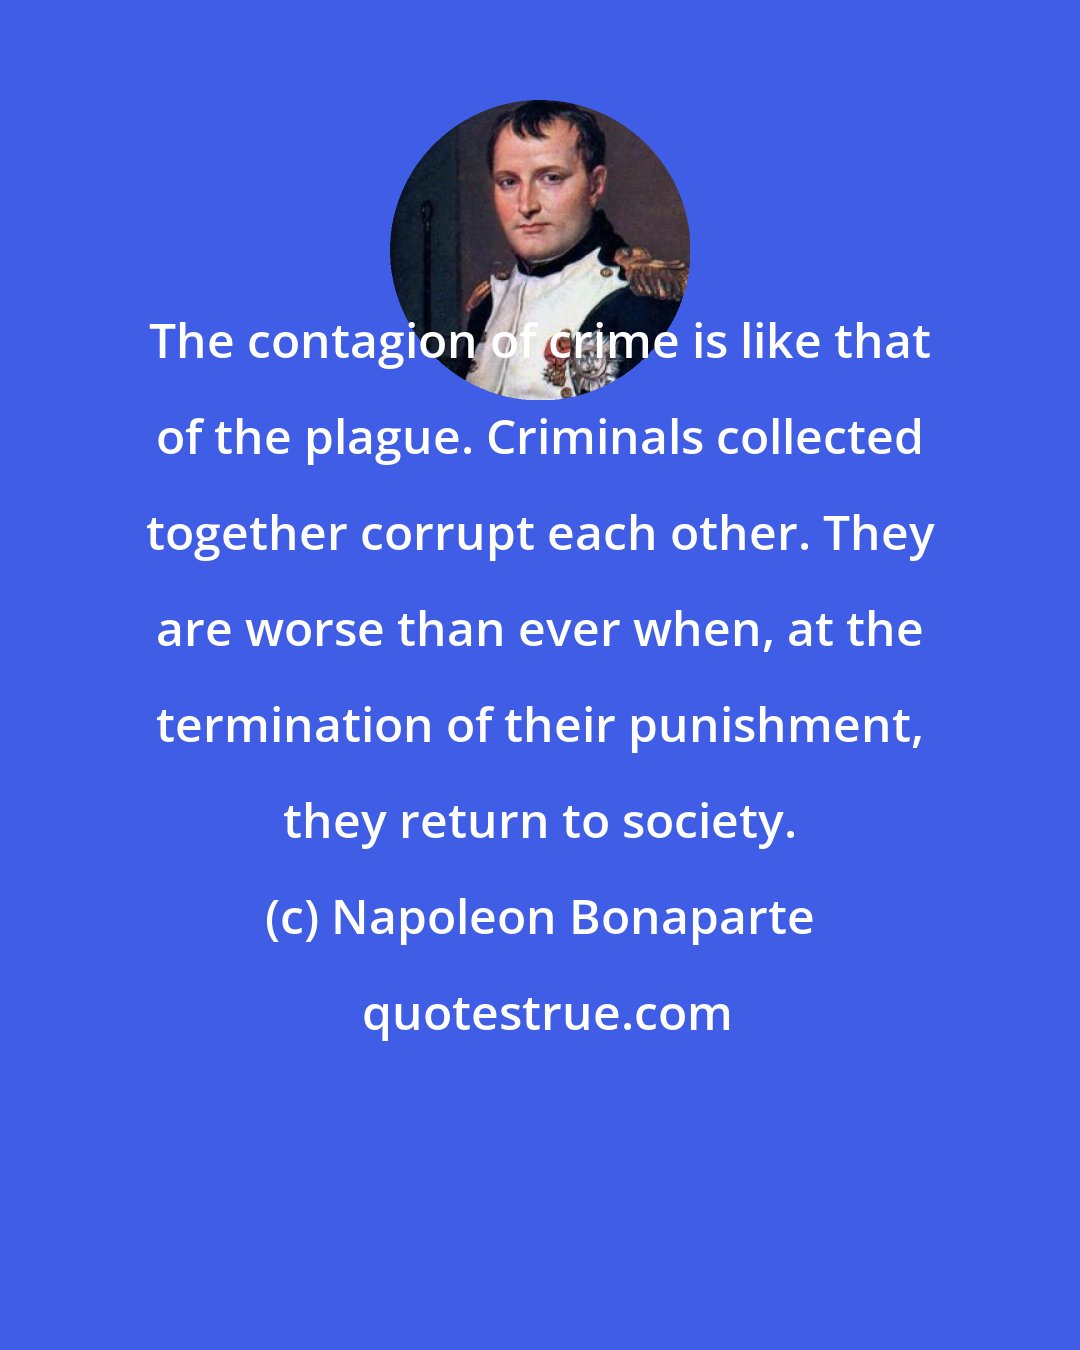 Napoleon Bonaparte: The contagion of crime is like that of the plague. Criminals collected together corrupt each other. They are worse than ever when, at the termination of their punishment, they return to society.